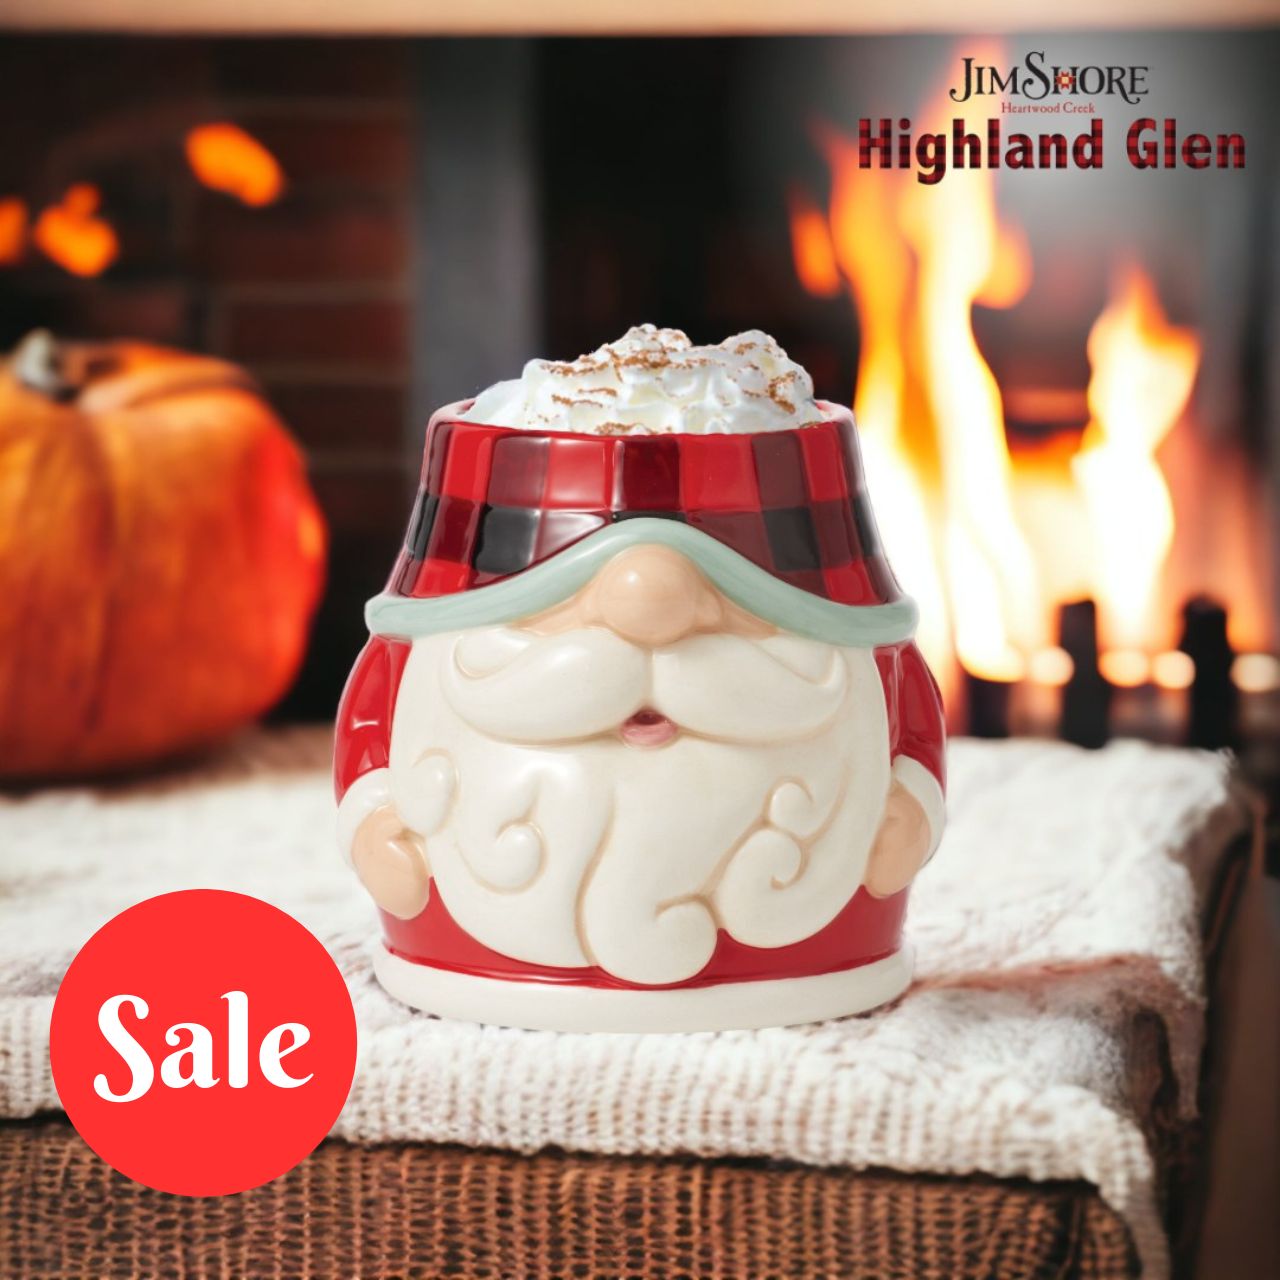 Heartwood Creek Highland Glen Mug  Designed by award winning artist Jim Shore as part of the Heartwood Creek Highland Glen Collection, hand crafted using high quality cast stone and hand painted, this festive mug is perfect for the Christmas season.